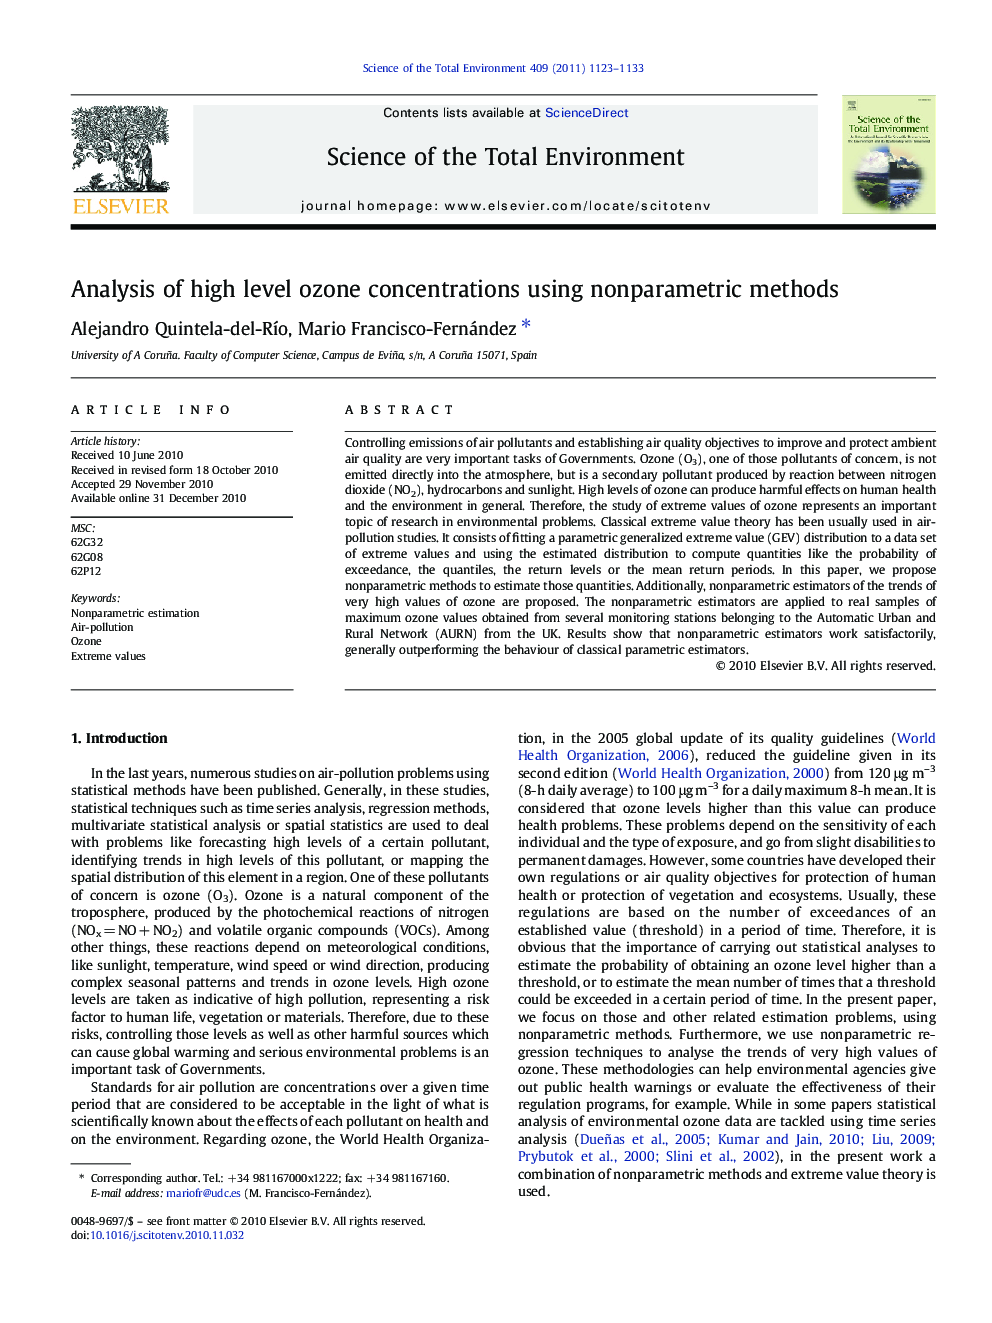 Analysis of high level ozone concentrations using nonparametric methods